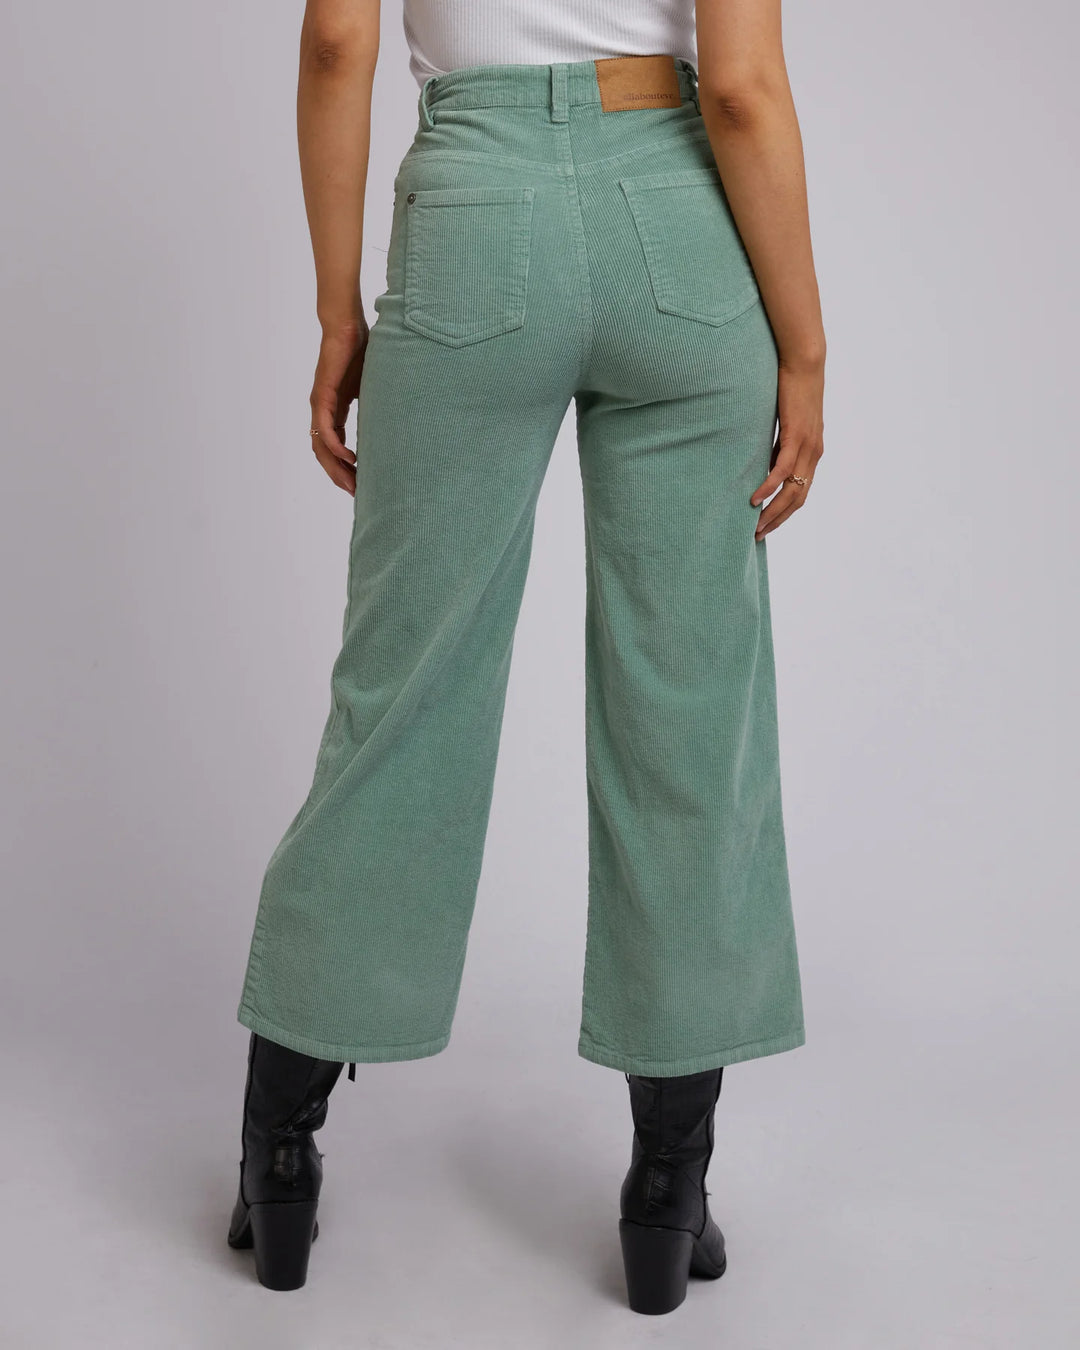 All About Eve Camilla Cord Pant- Sage